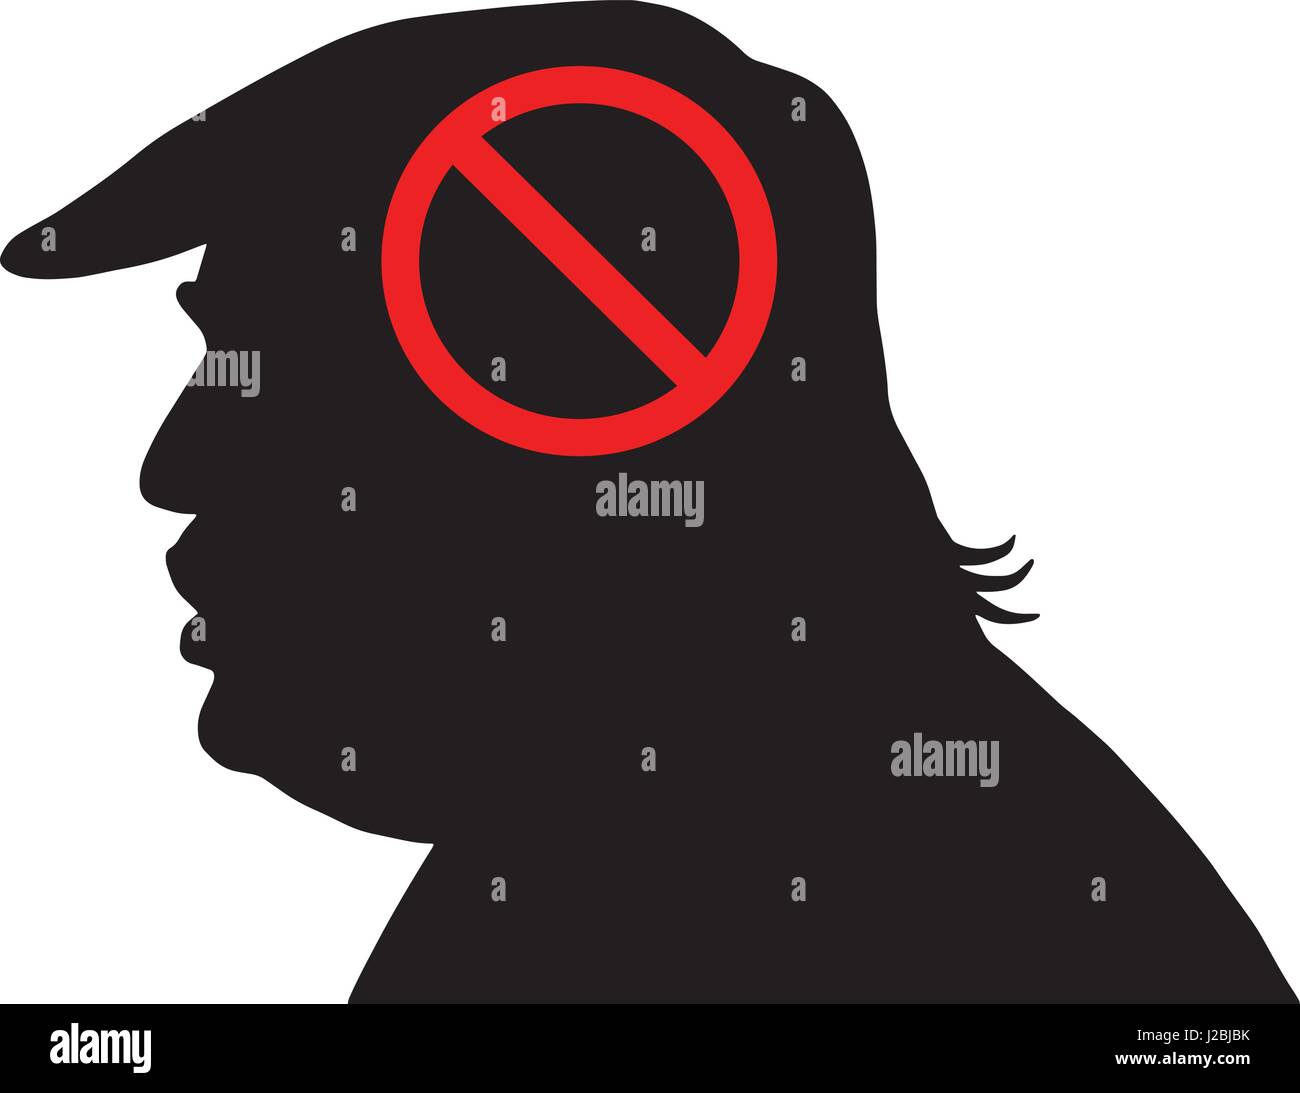 Donald Trump Silhouette With Anti Sign. Vector Icon Illustration Stock Vector